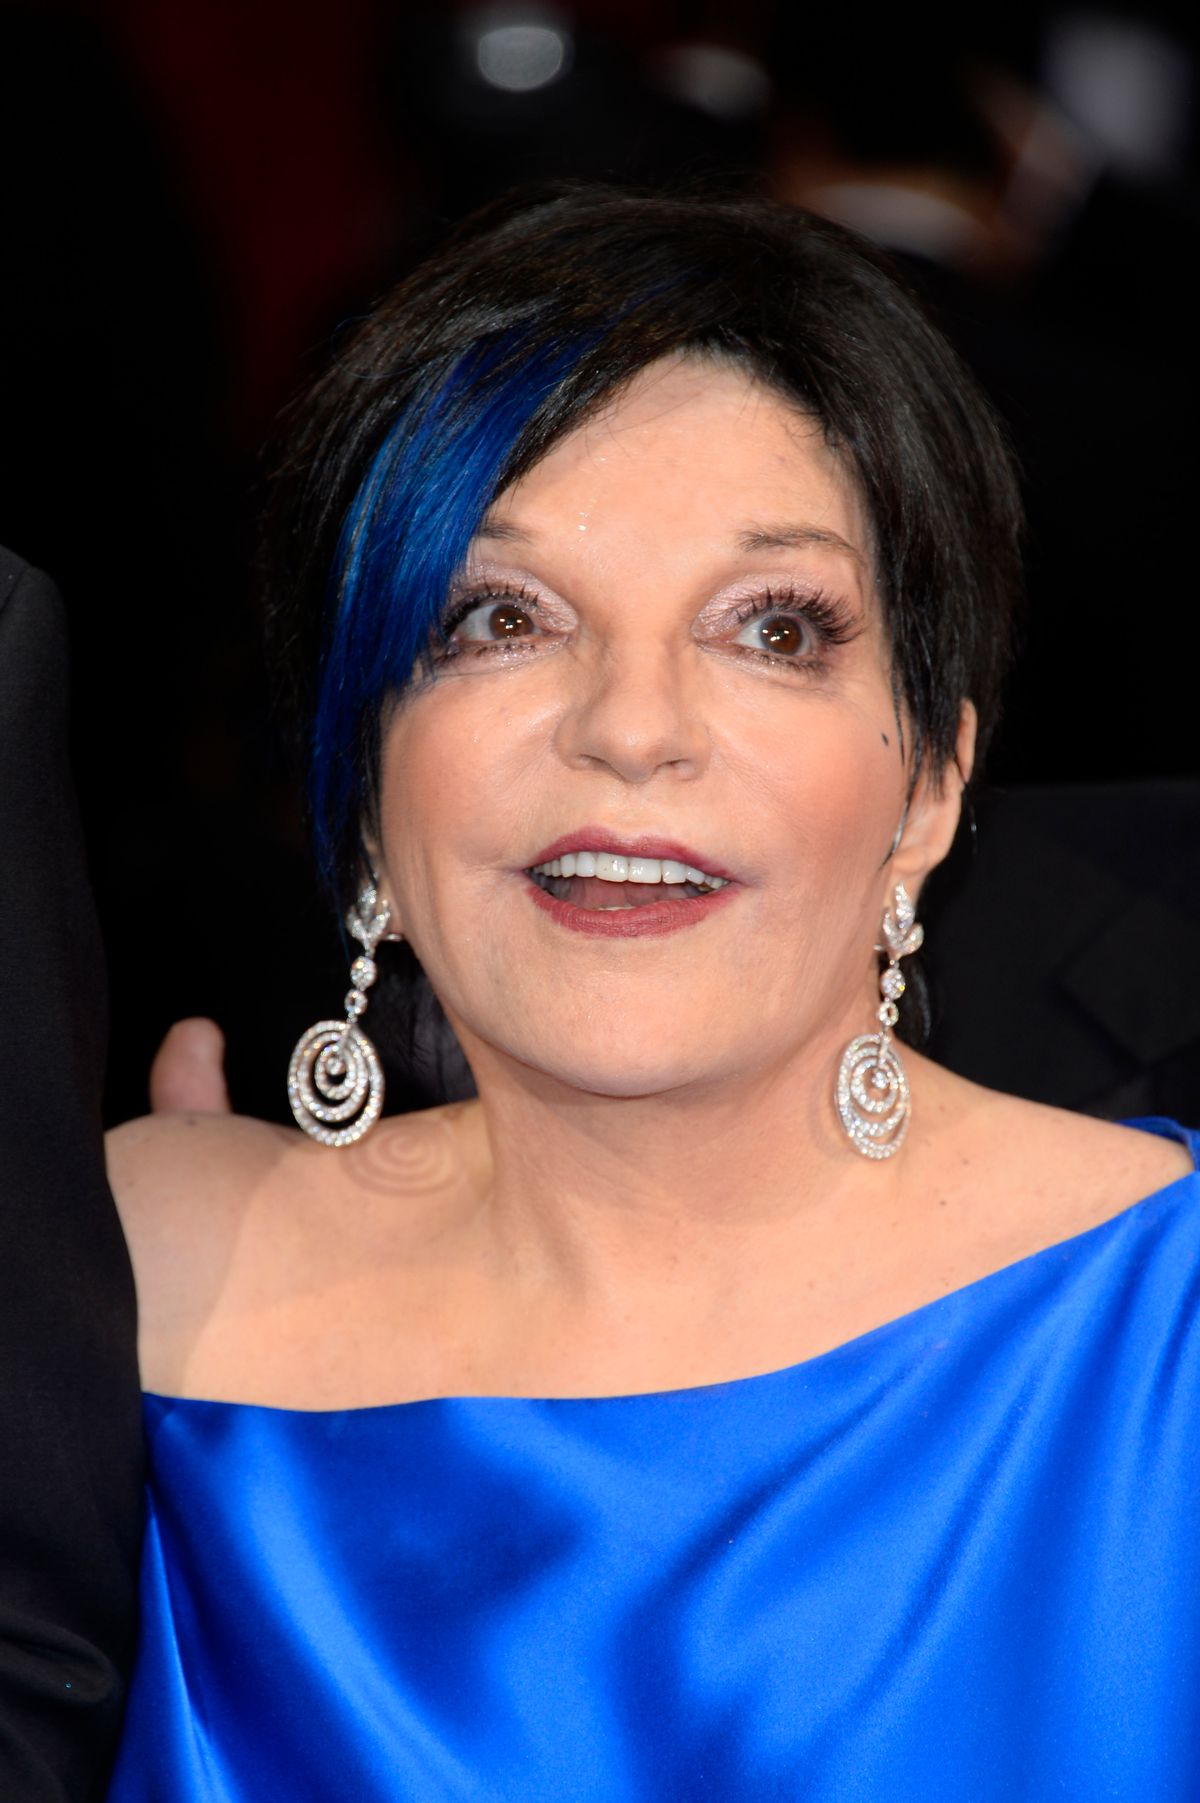 Liza Minnelli arrives at the Oscars on Sunday, March 2, 2014, at the Dolby Theatre in Los Angeles.  (Photo by Dan Steinberg/Invision/AP)  (Dan Steinberg/invision/ap)